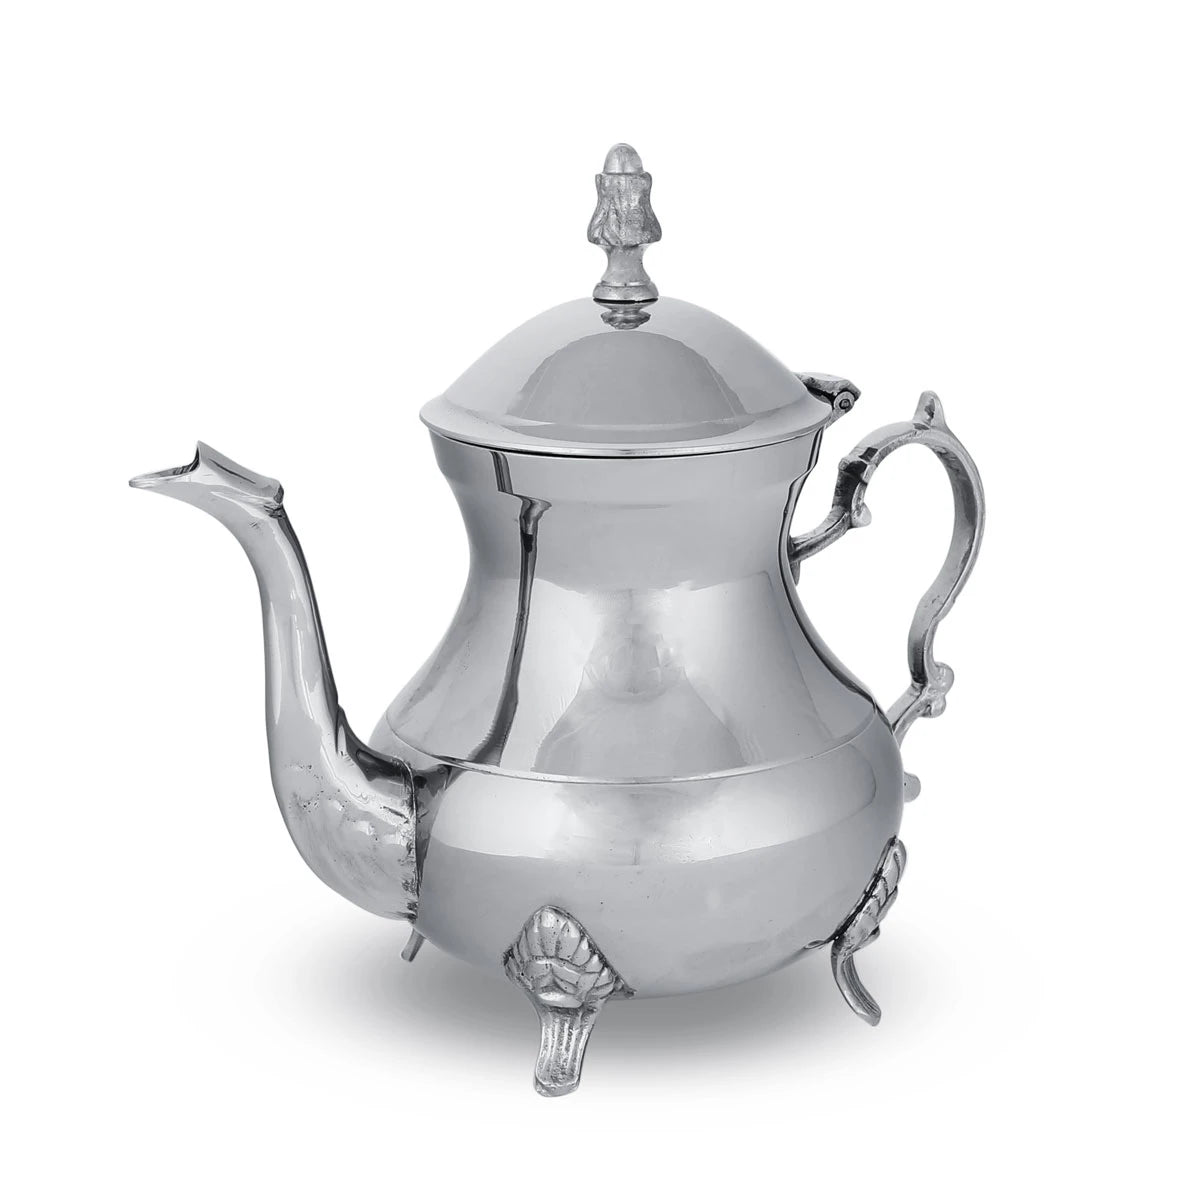 Front View of Plain Brass Teapot - Glossy Silver